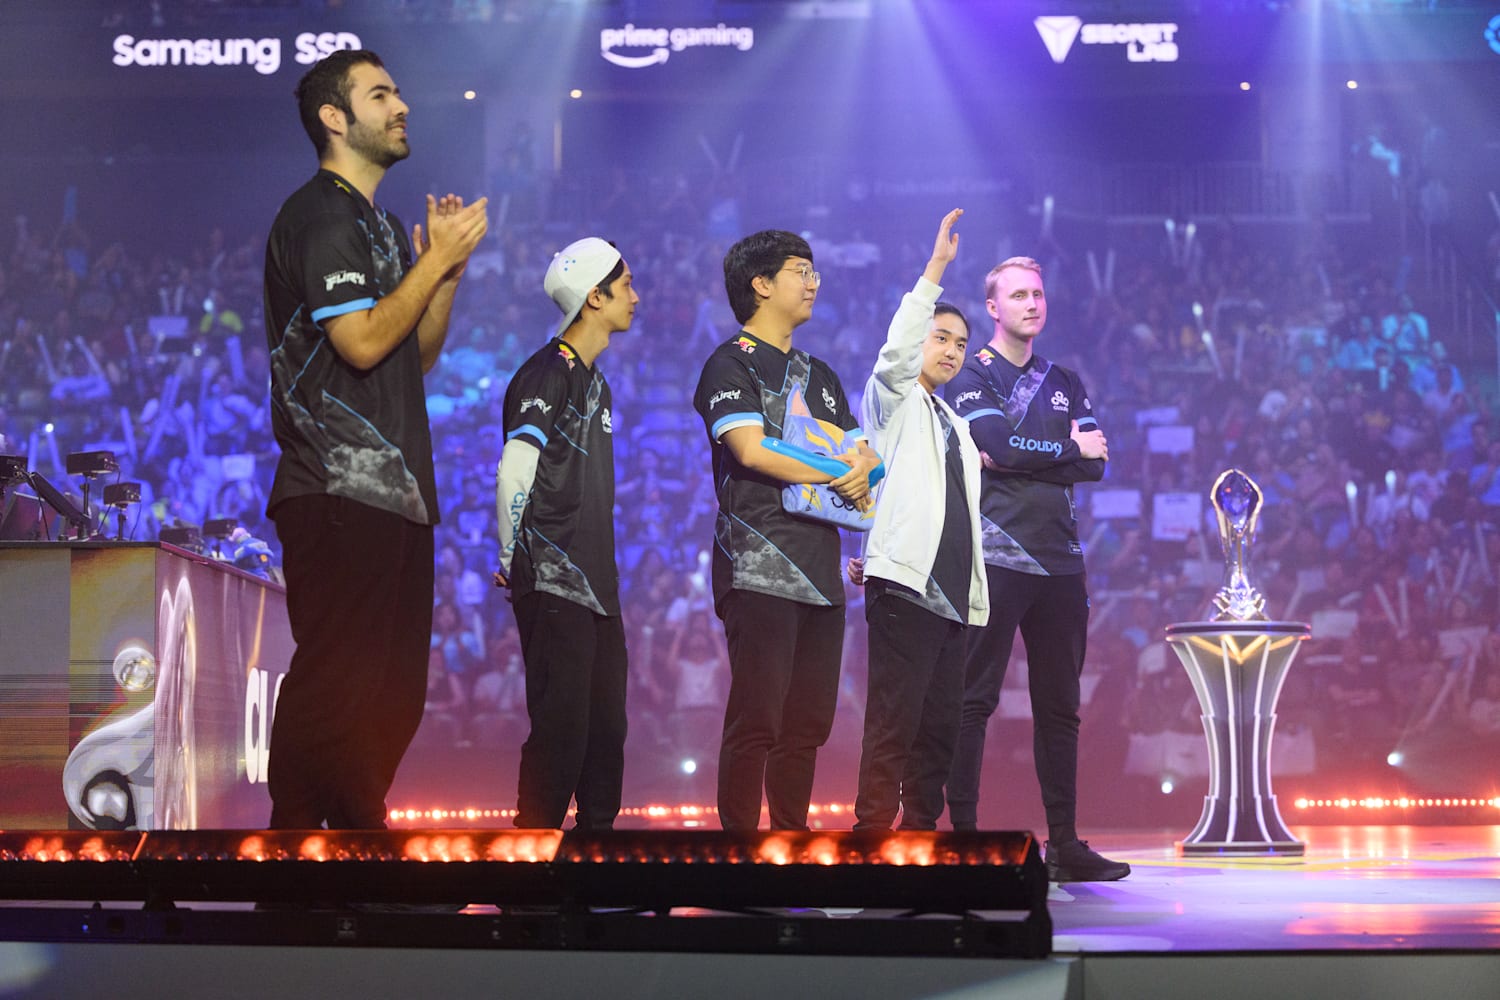 Business of Esports - Cloud9 Unveils Collaboration With The Smurfs